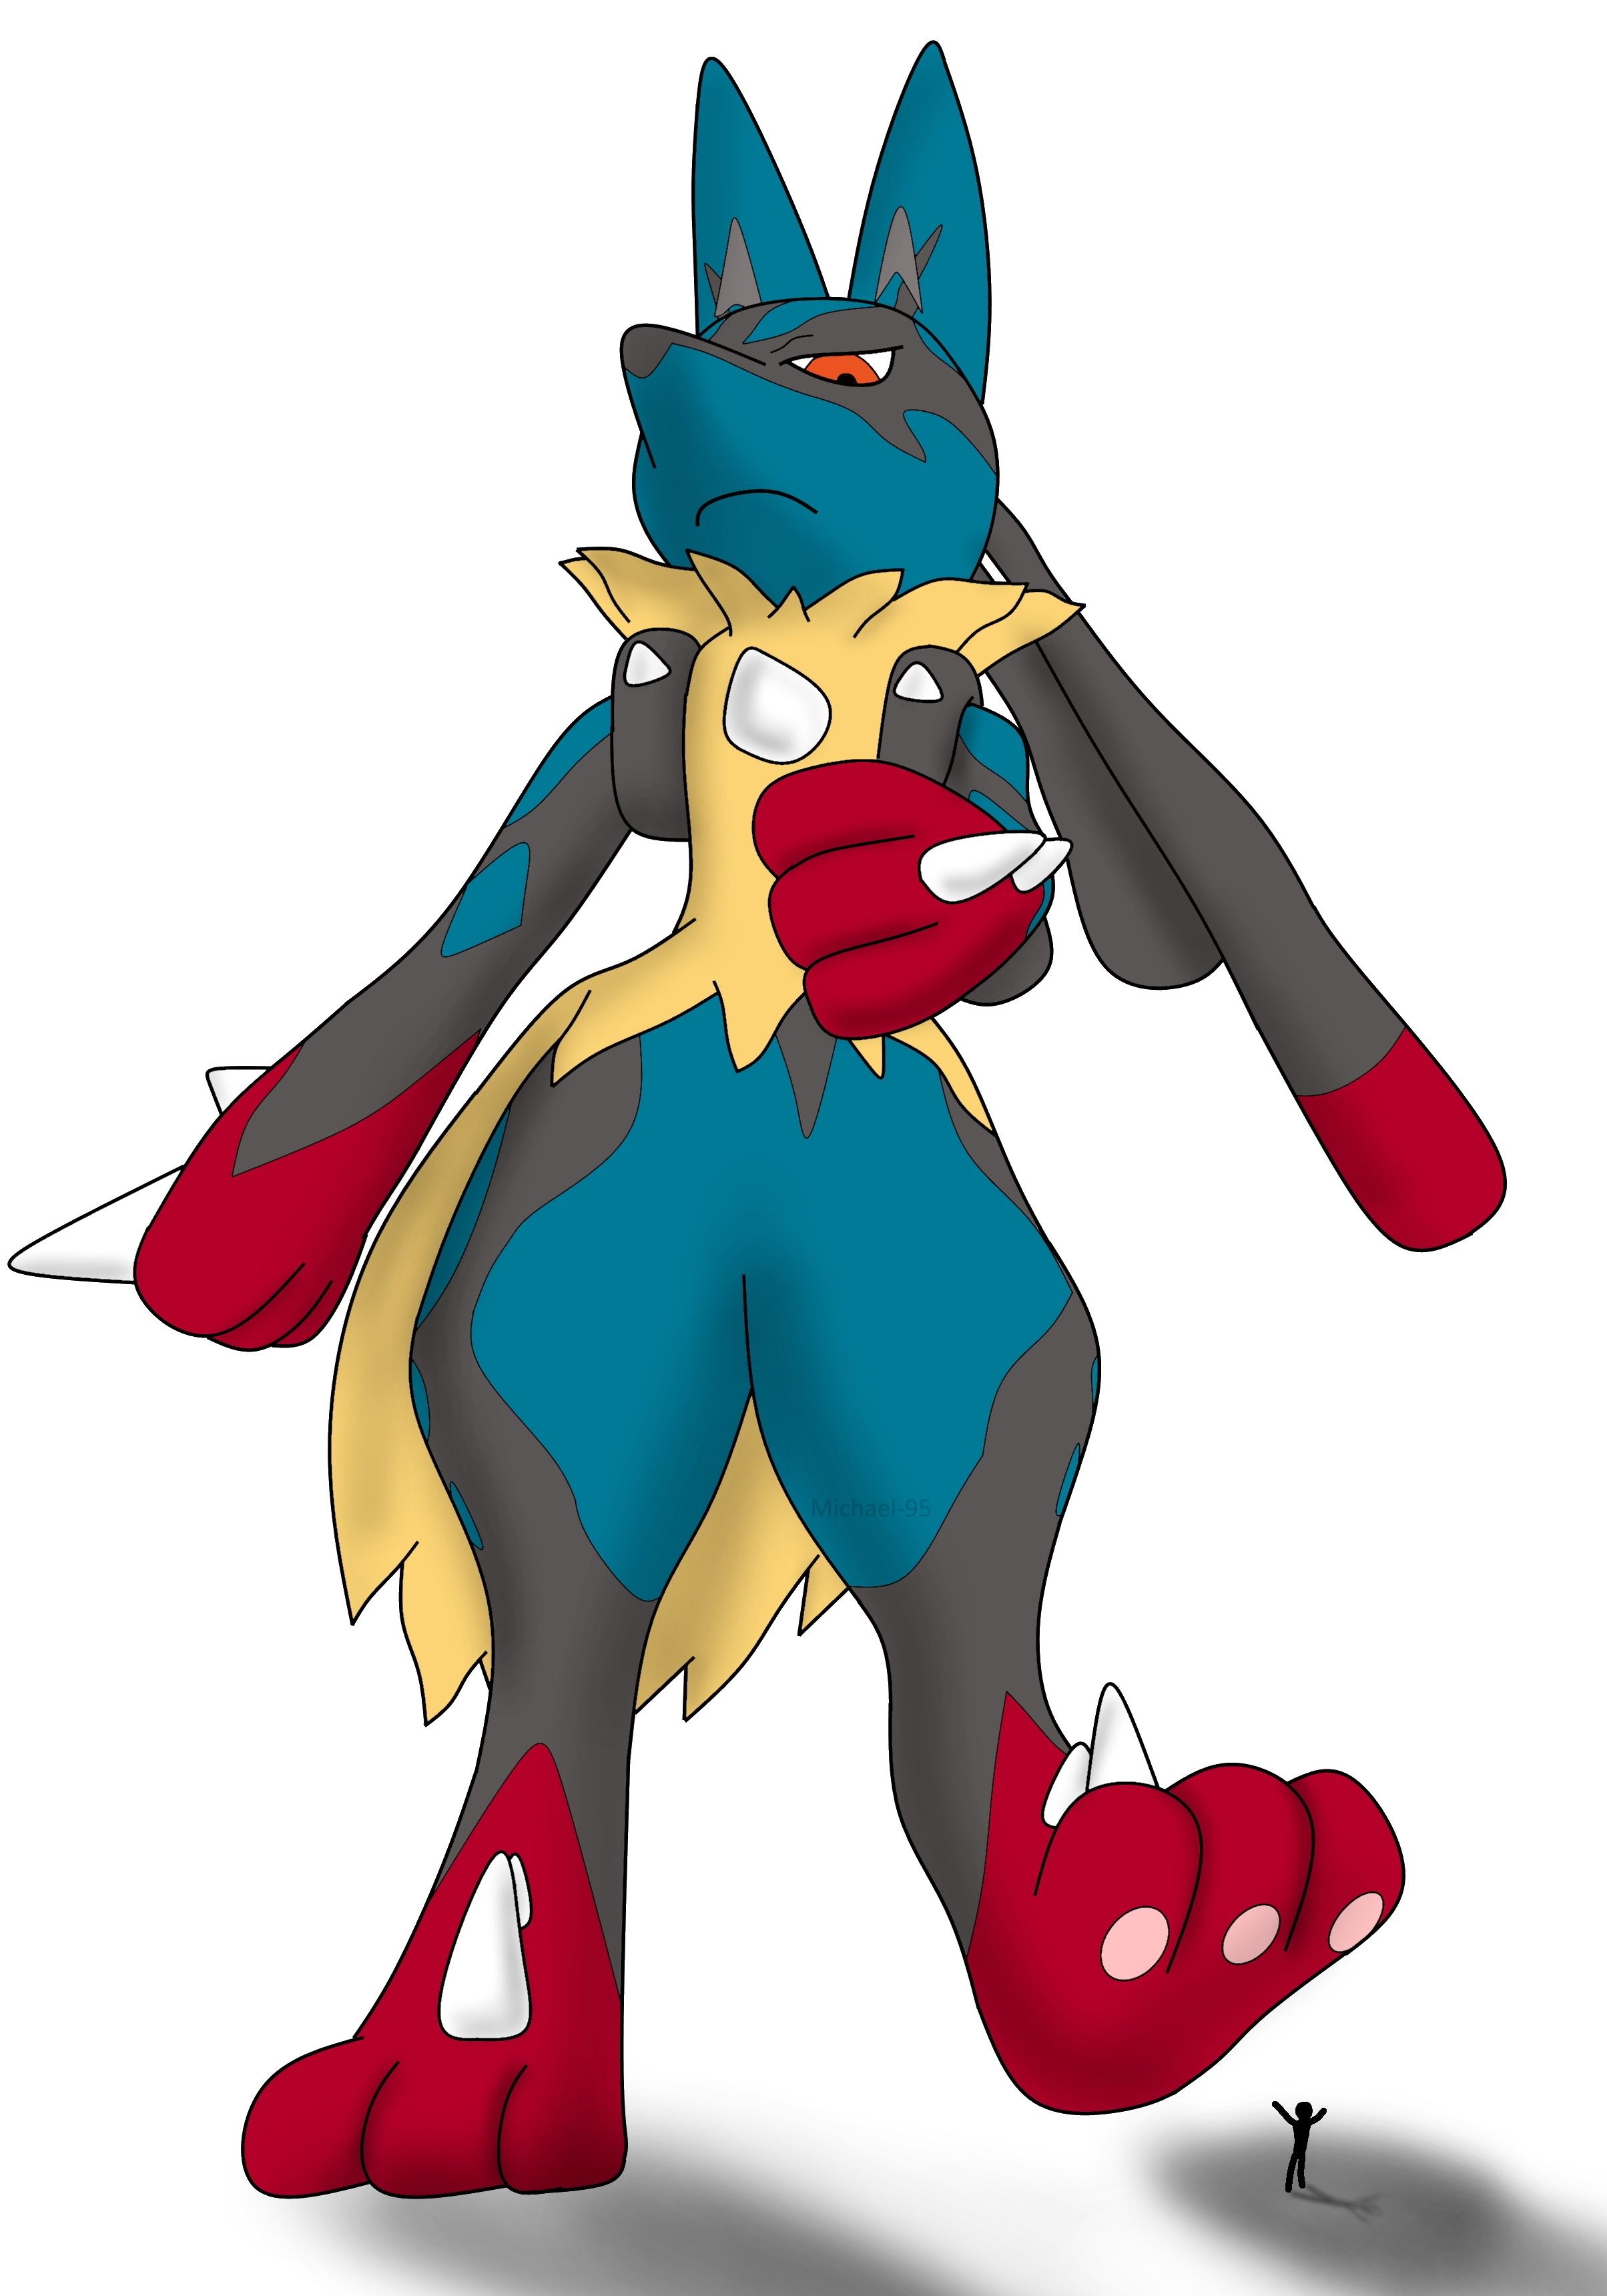 Mega Lucario in Pokemon FireRed by 0XinsertclevernameX0 on DeviantArt